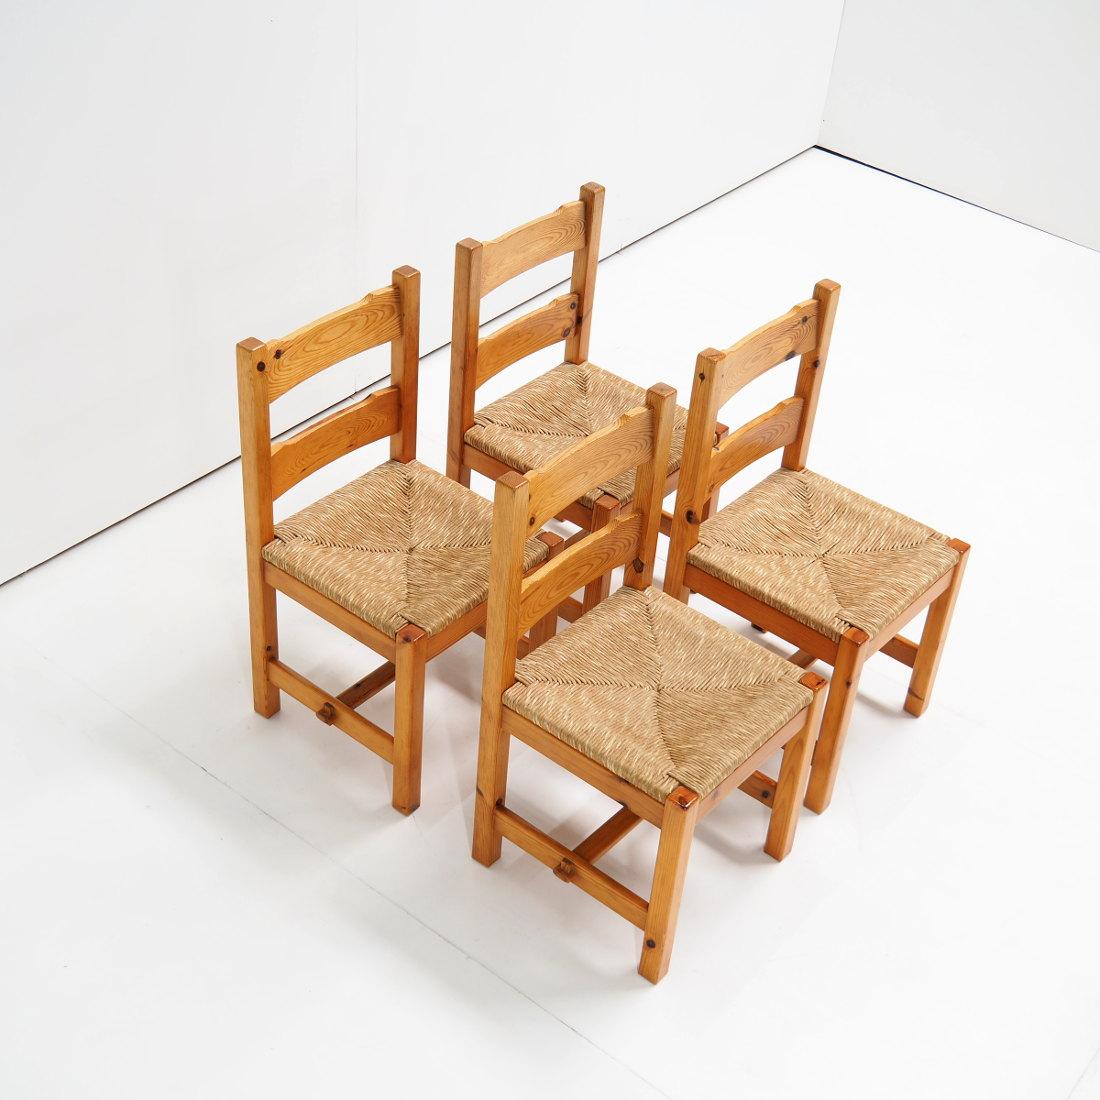 Set of 4 chairs in solid pine wood. The set is breathing 1970’s all over and after being forgotten for quite some time, these kind of chairs are making their comeback. And for a reason. Don’t they make you happy?

Designer and manufacturer unknown.